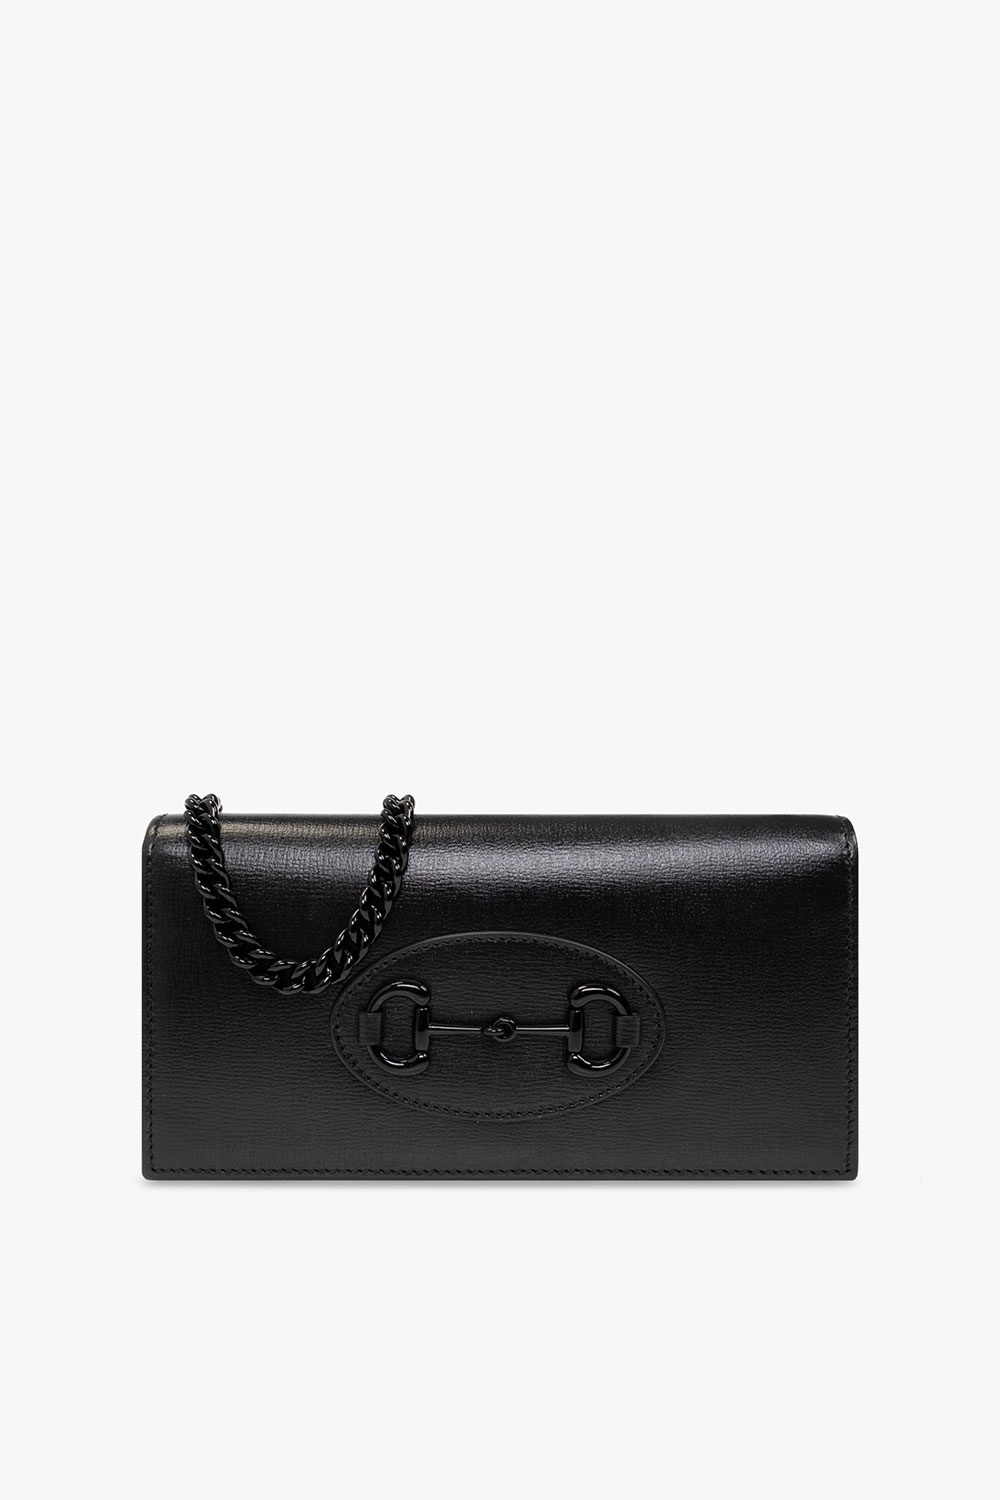 Gucci Long Wallet with Horsebit, Black, Leather